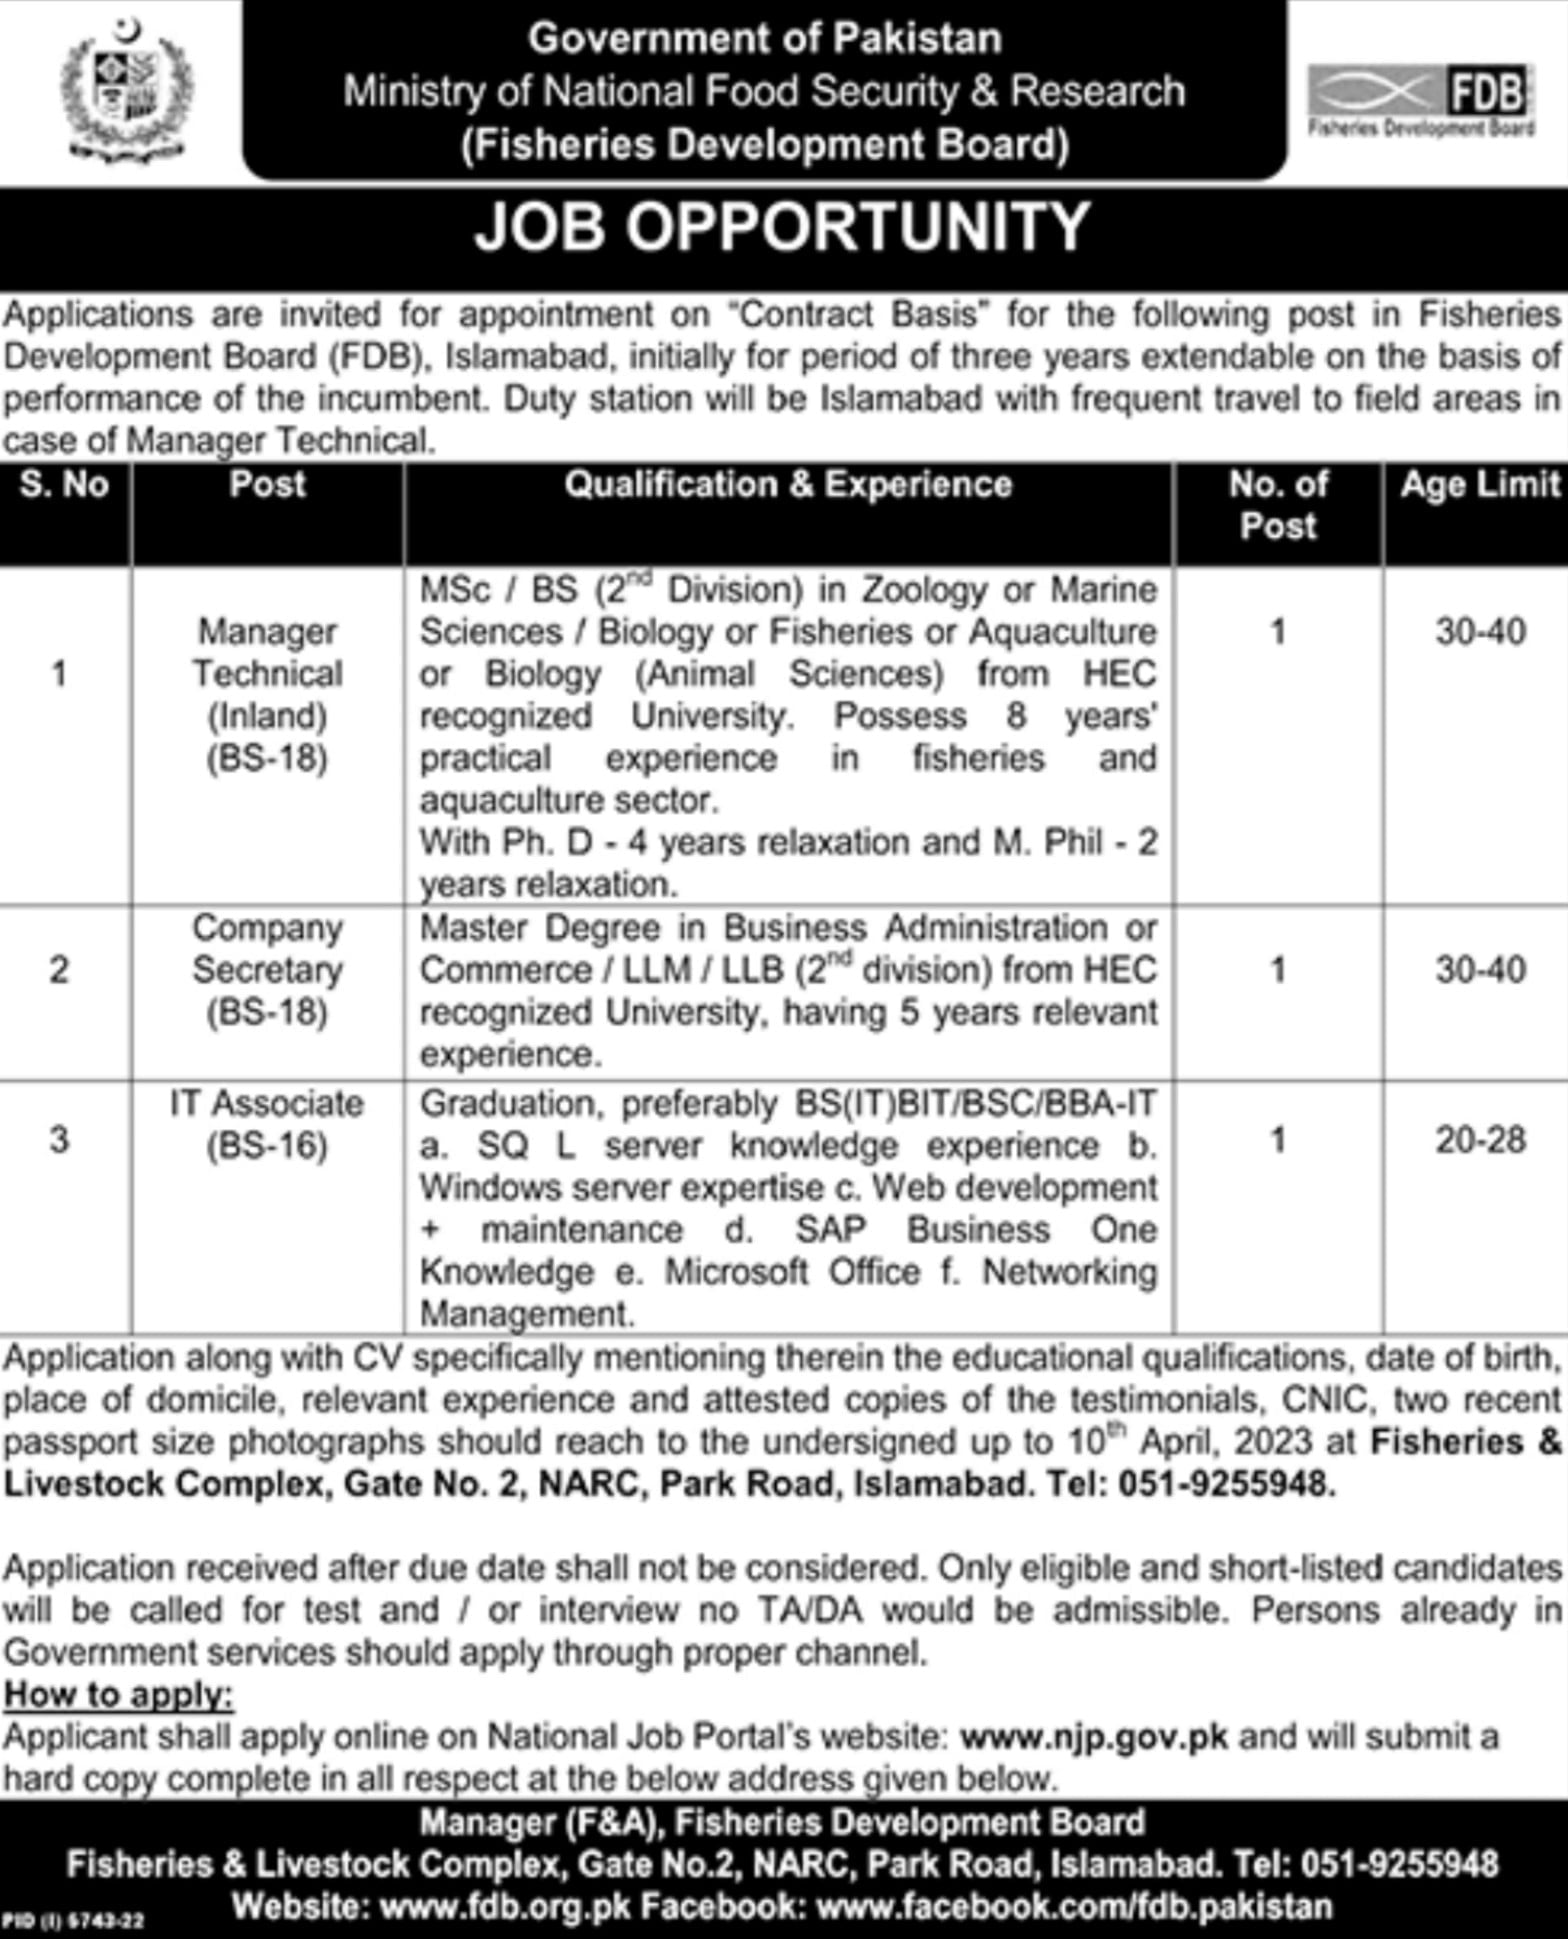 JOB IN MINISTRY OF NATIONAL FOOD SECURITY & RESEARCH (Fisheries Development Board) PAKISTAN 2023